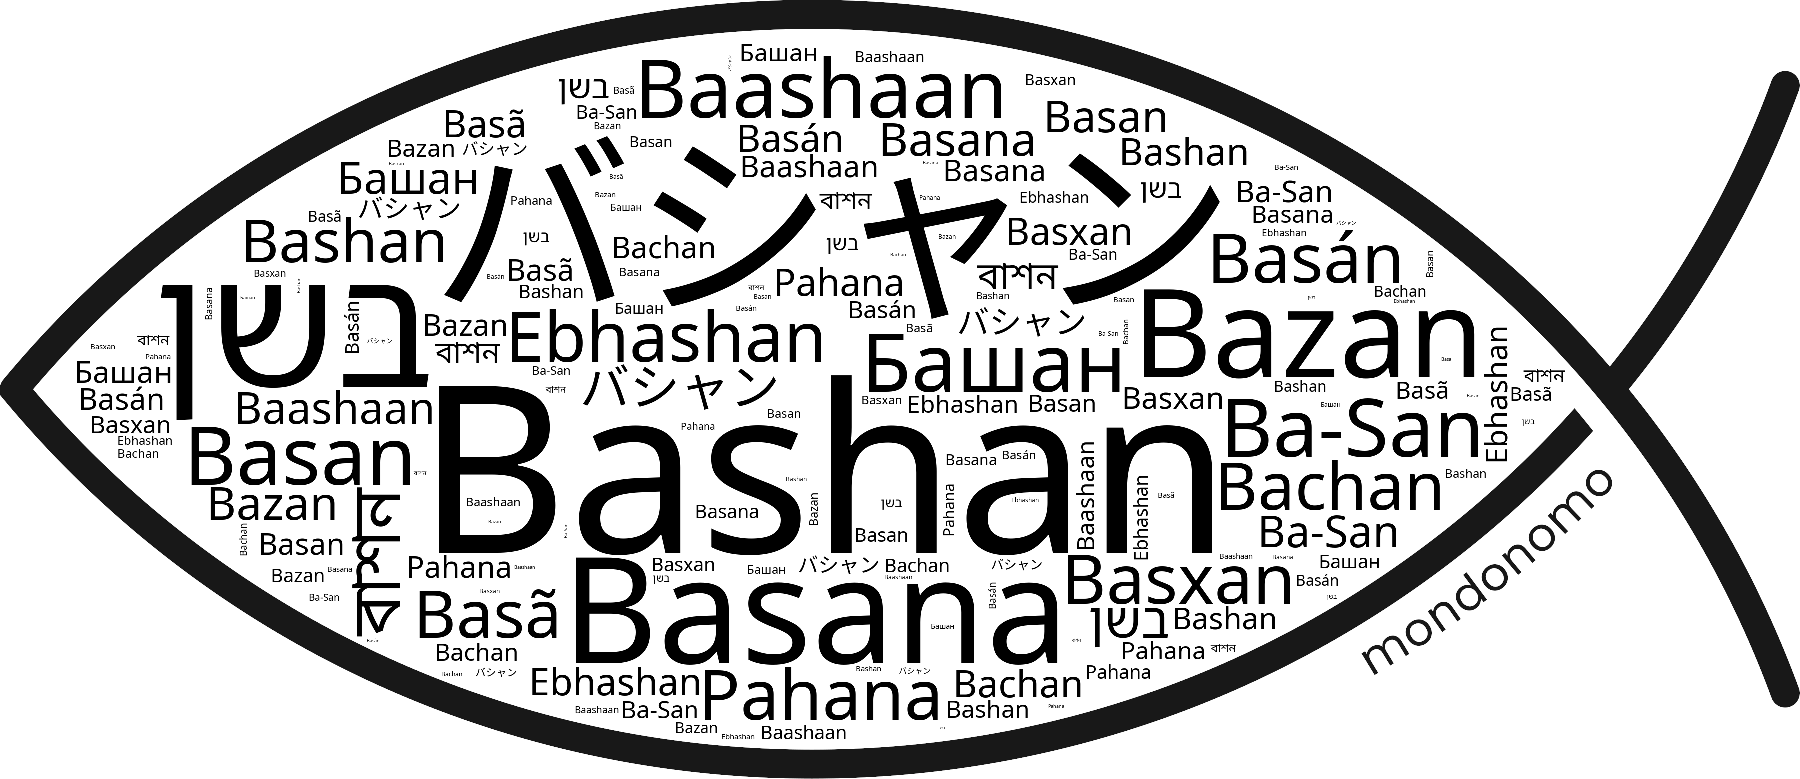 Name Bashan in the world's Bibles